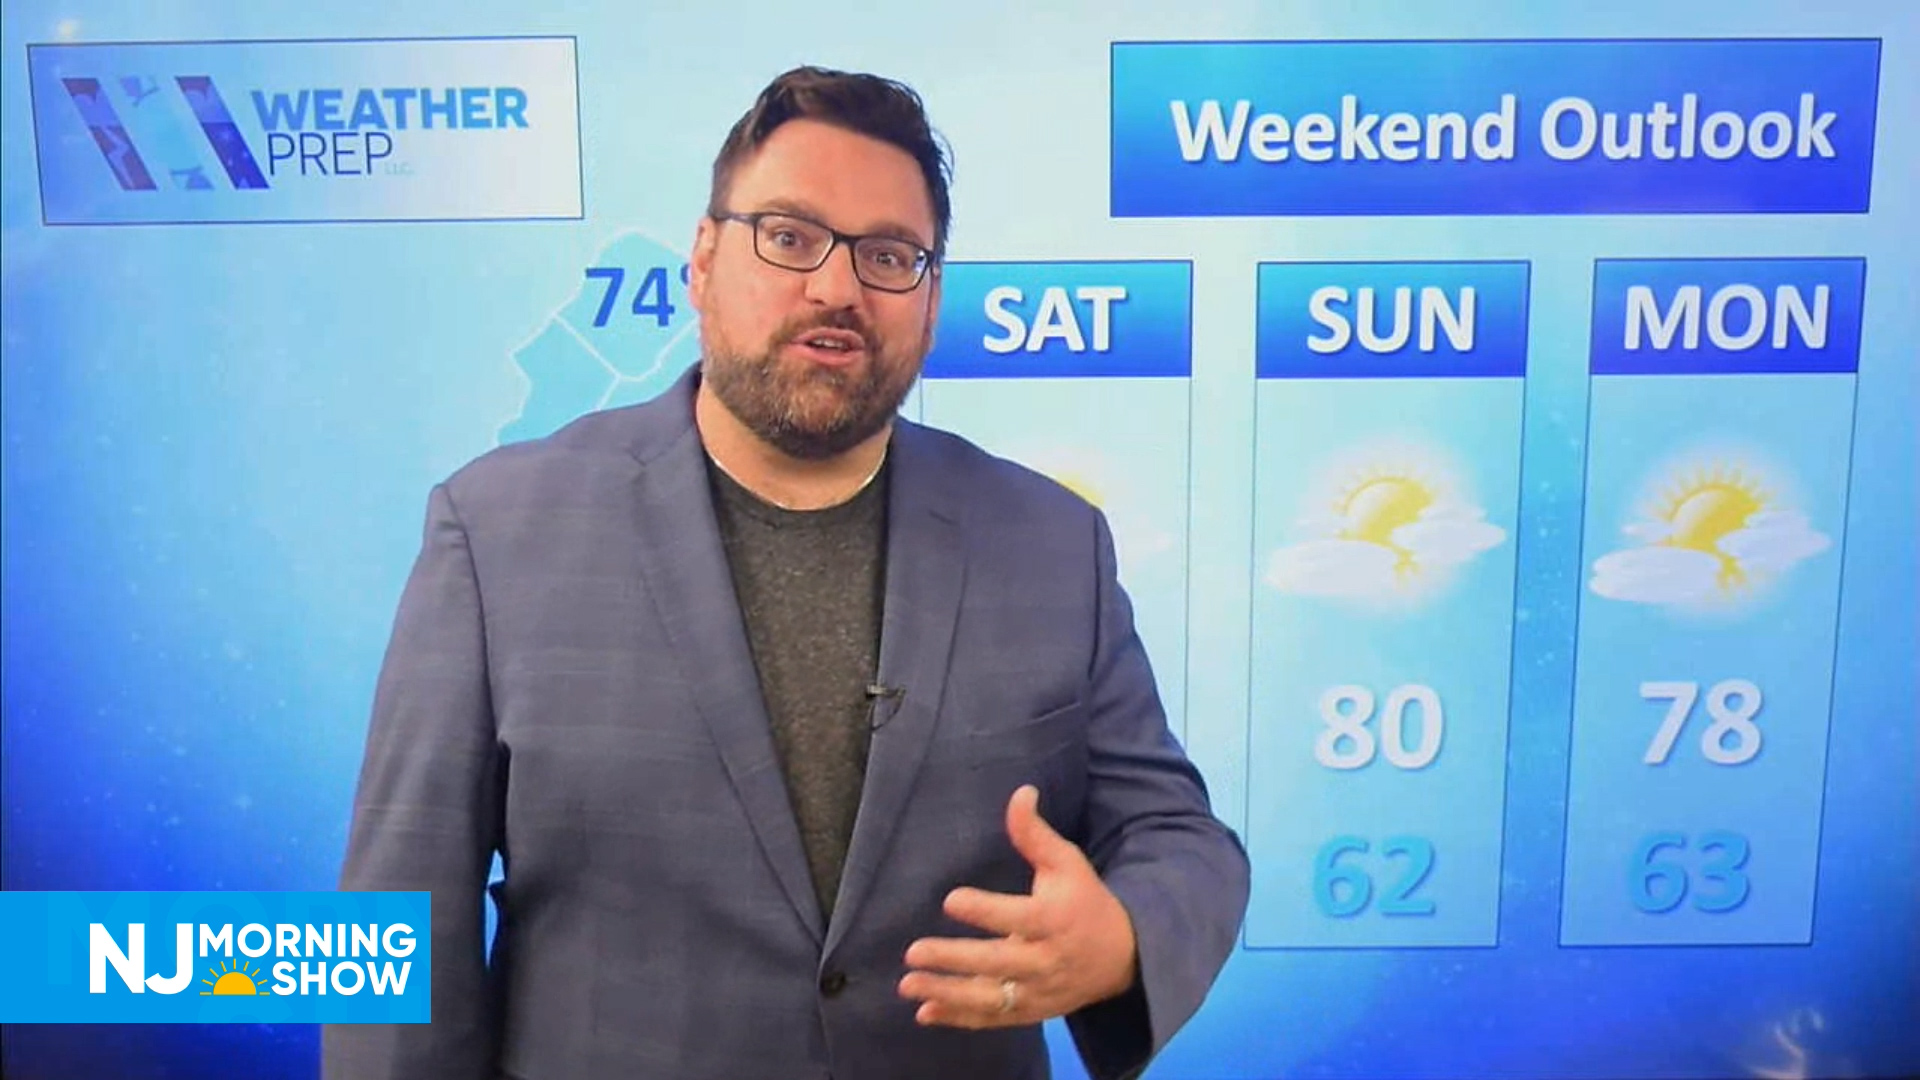 NJ Morning Show – Weekend Weather Outlook